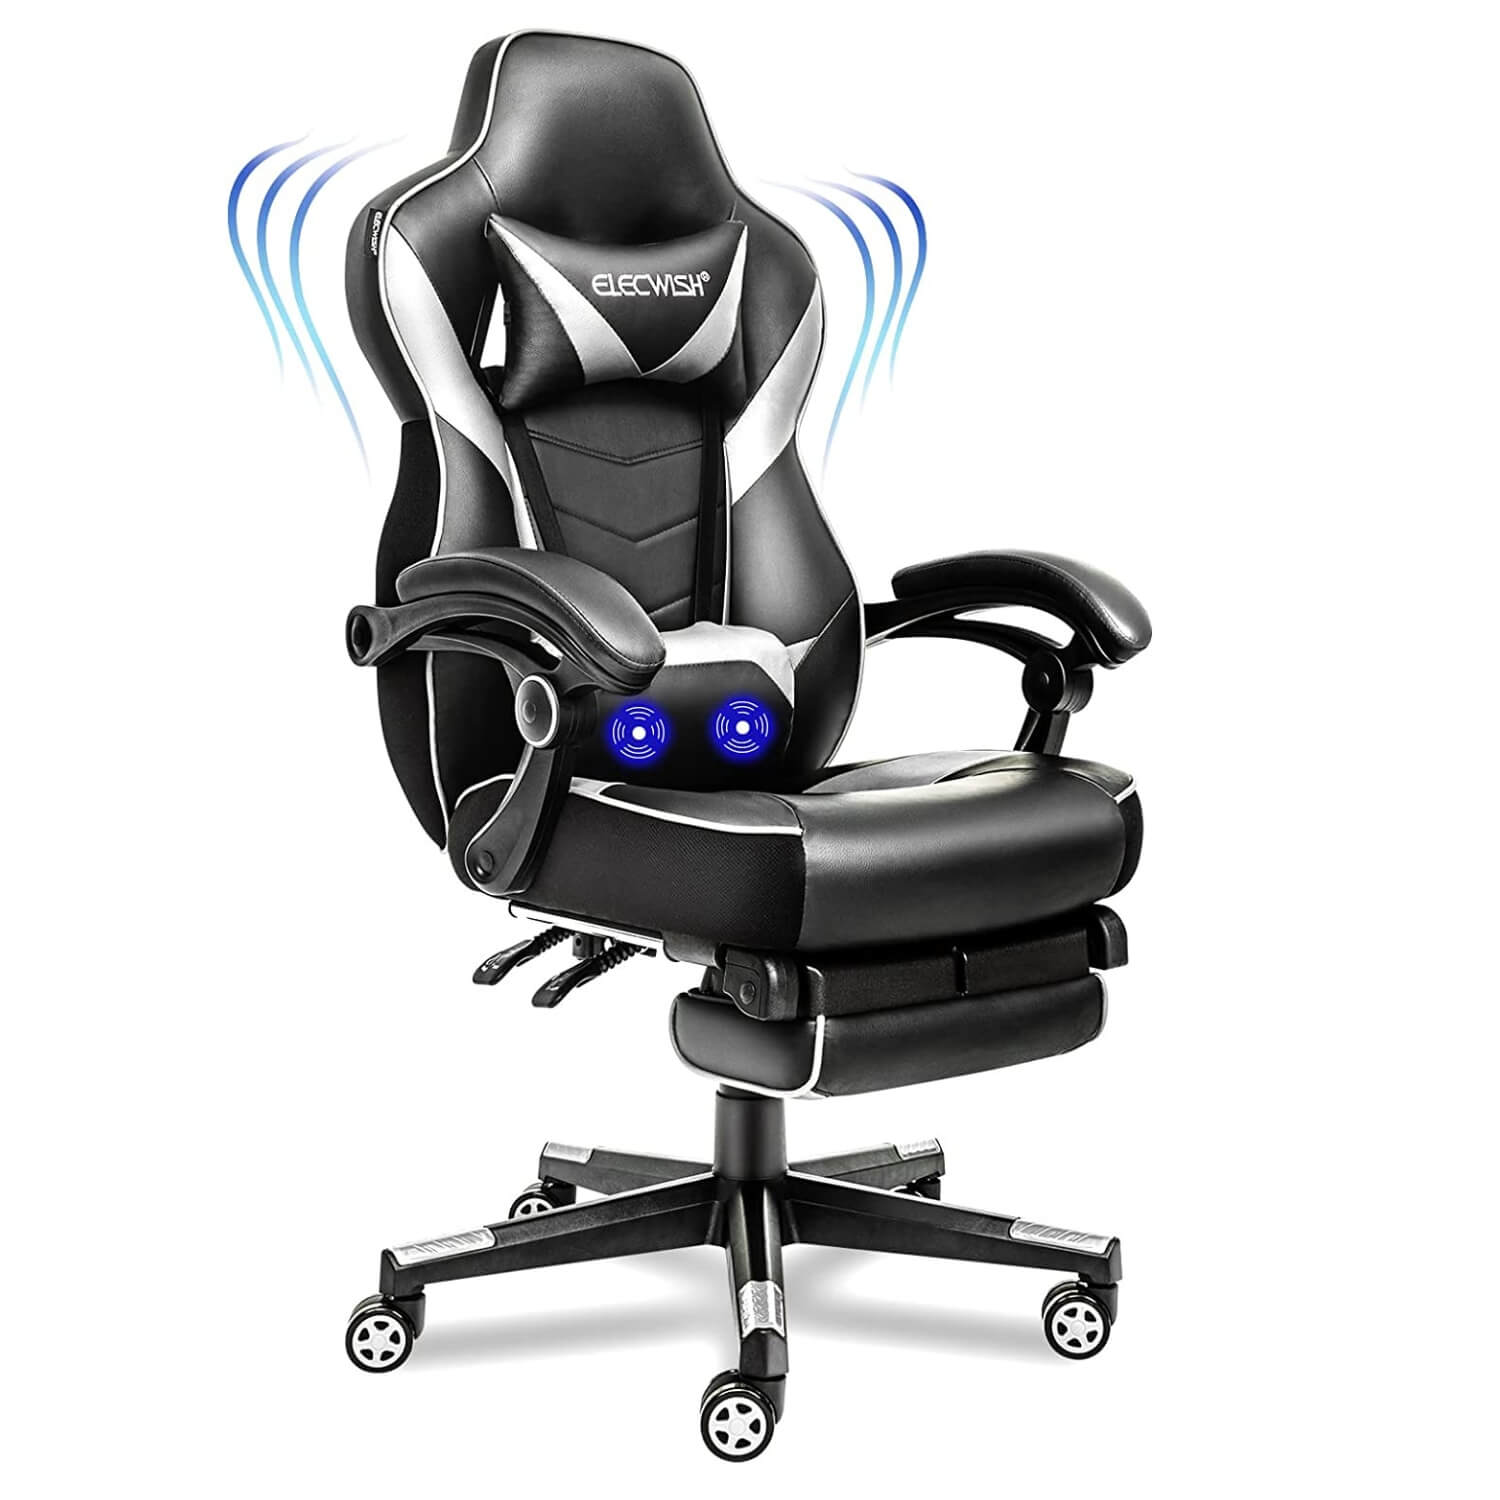 Elecwish massage gaming chair with footrest OC112 white